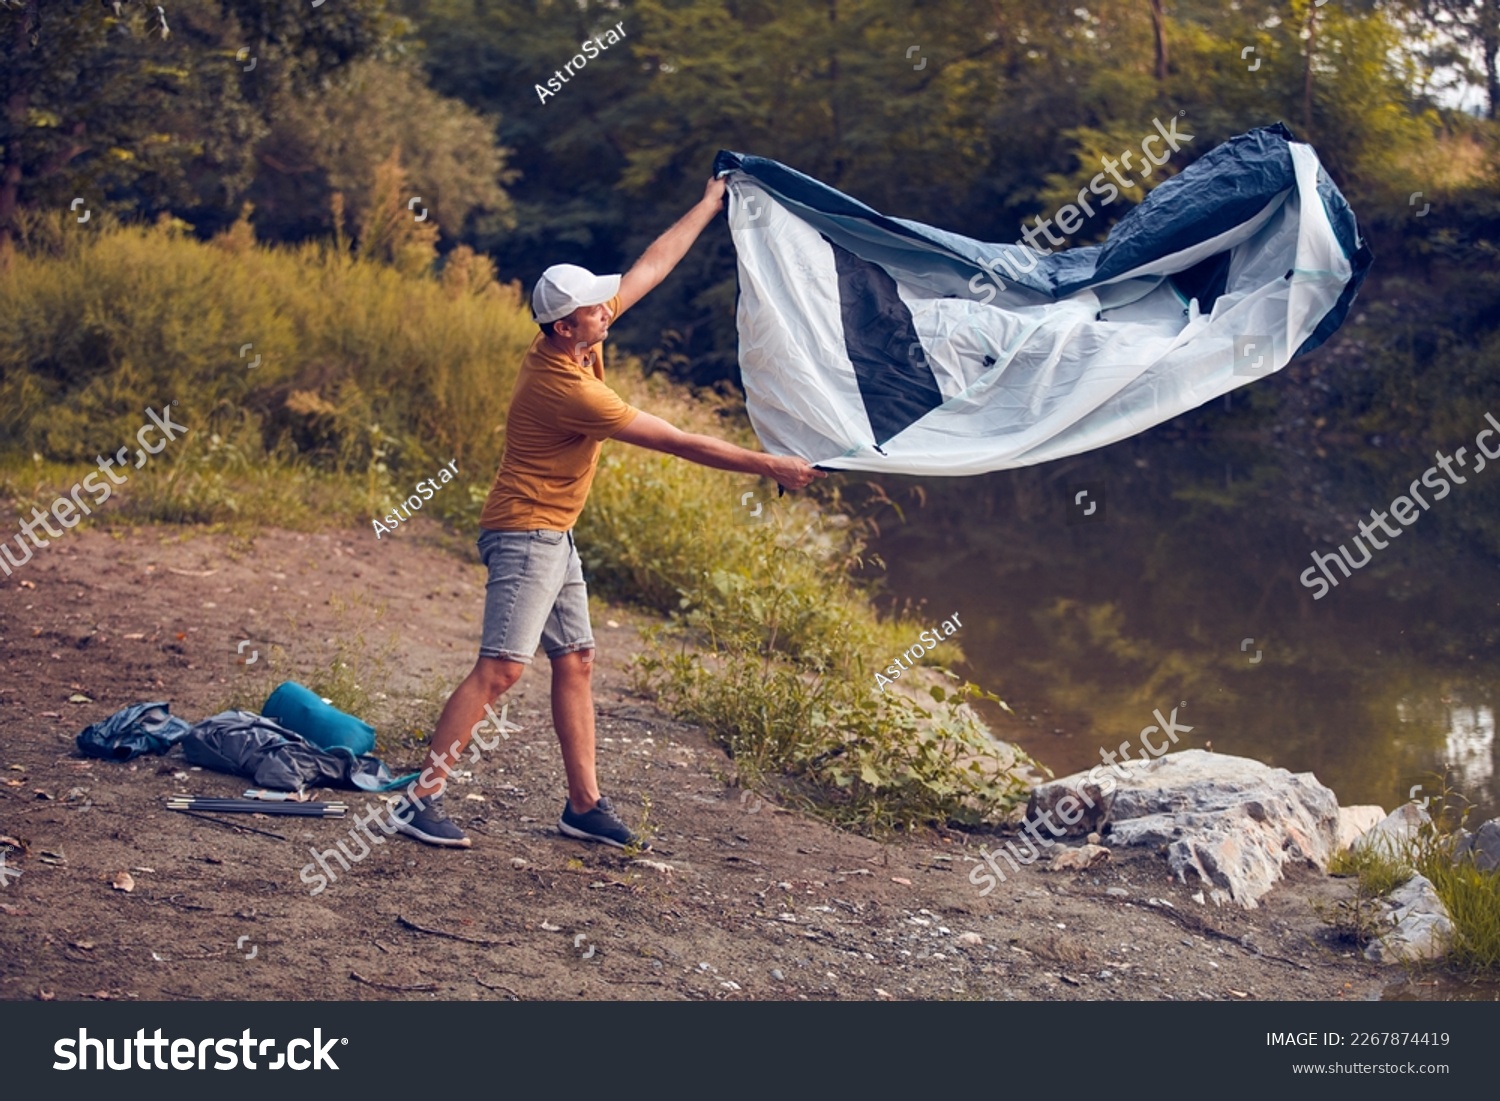 Man camping in nature, setting up the tent for overnight staying near forest river. #2267874419